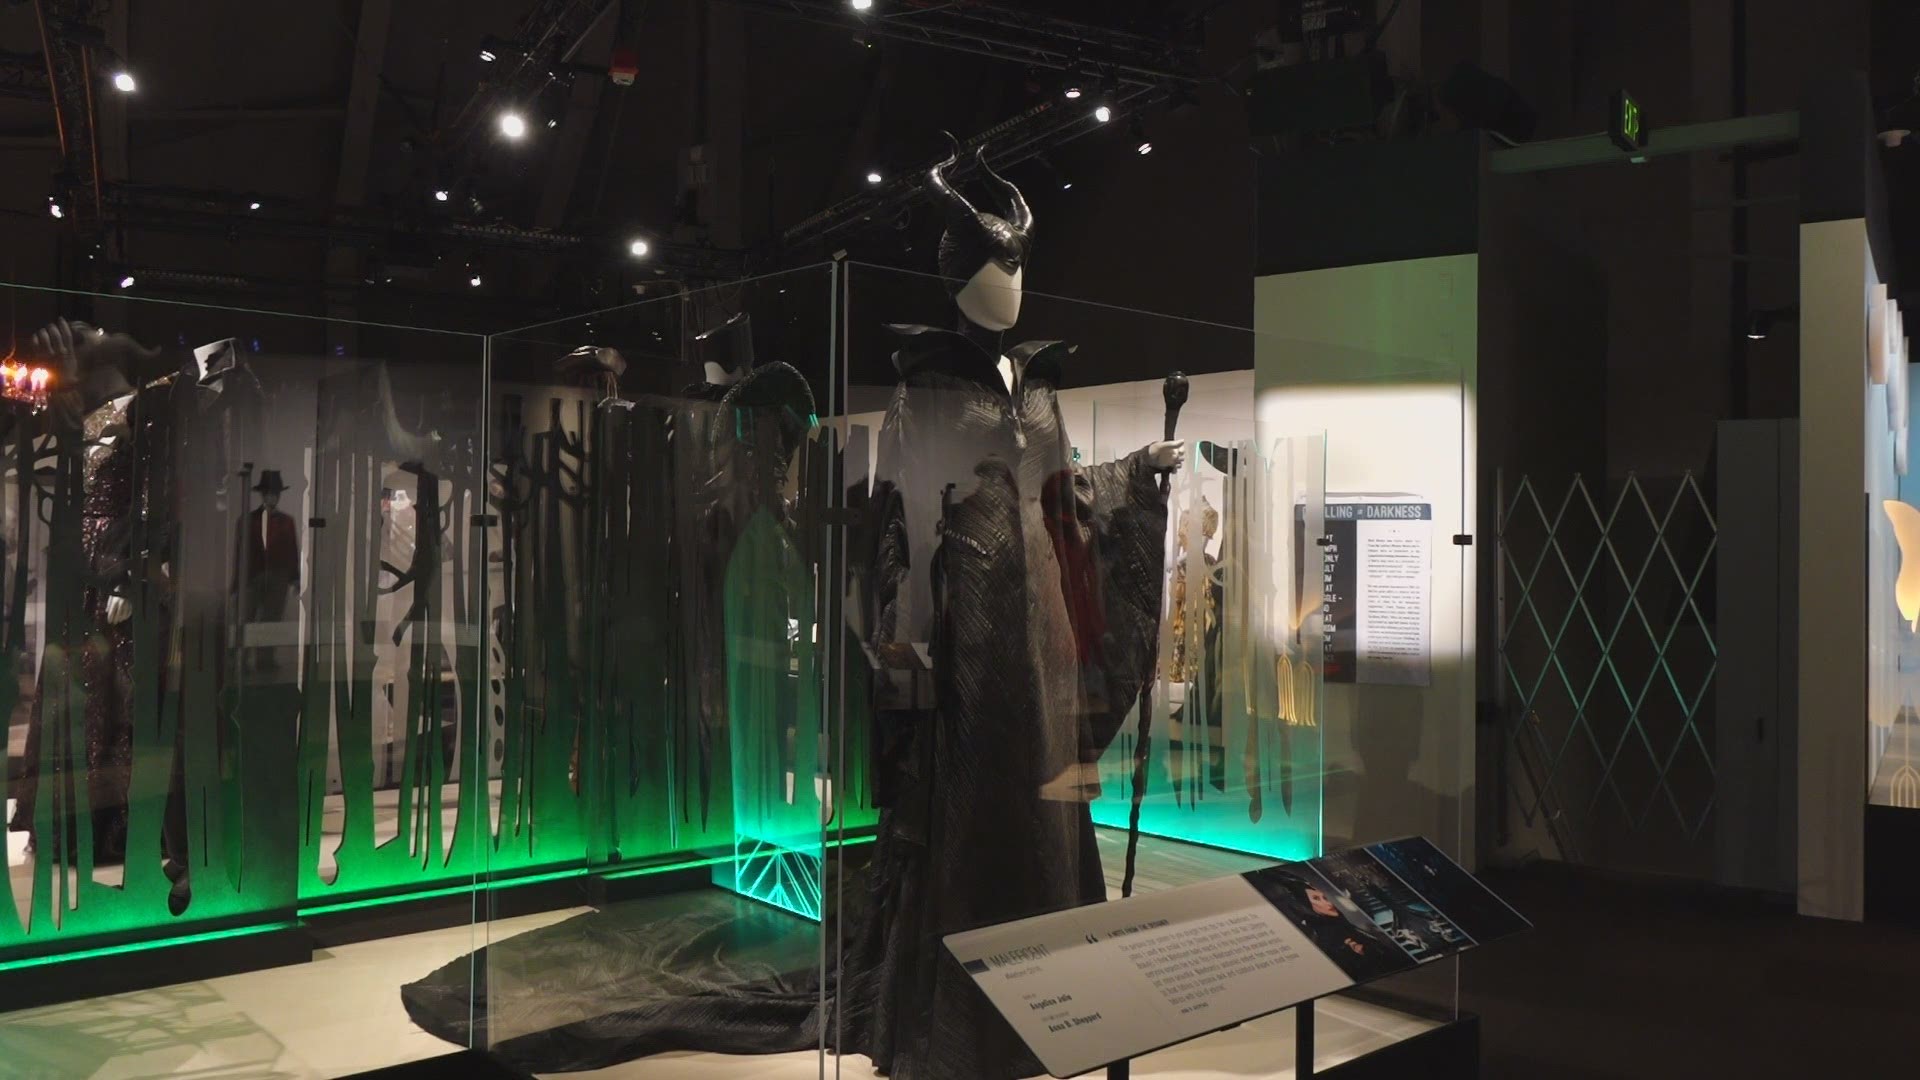 The "Heroes & Villains: The Art of the Disney Costume" immersive experience will open at the Museum of Pop Culture on June 5.